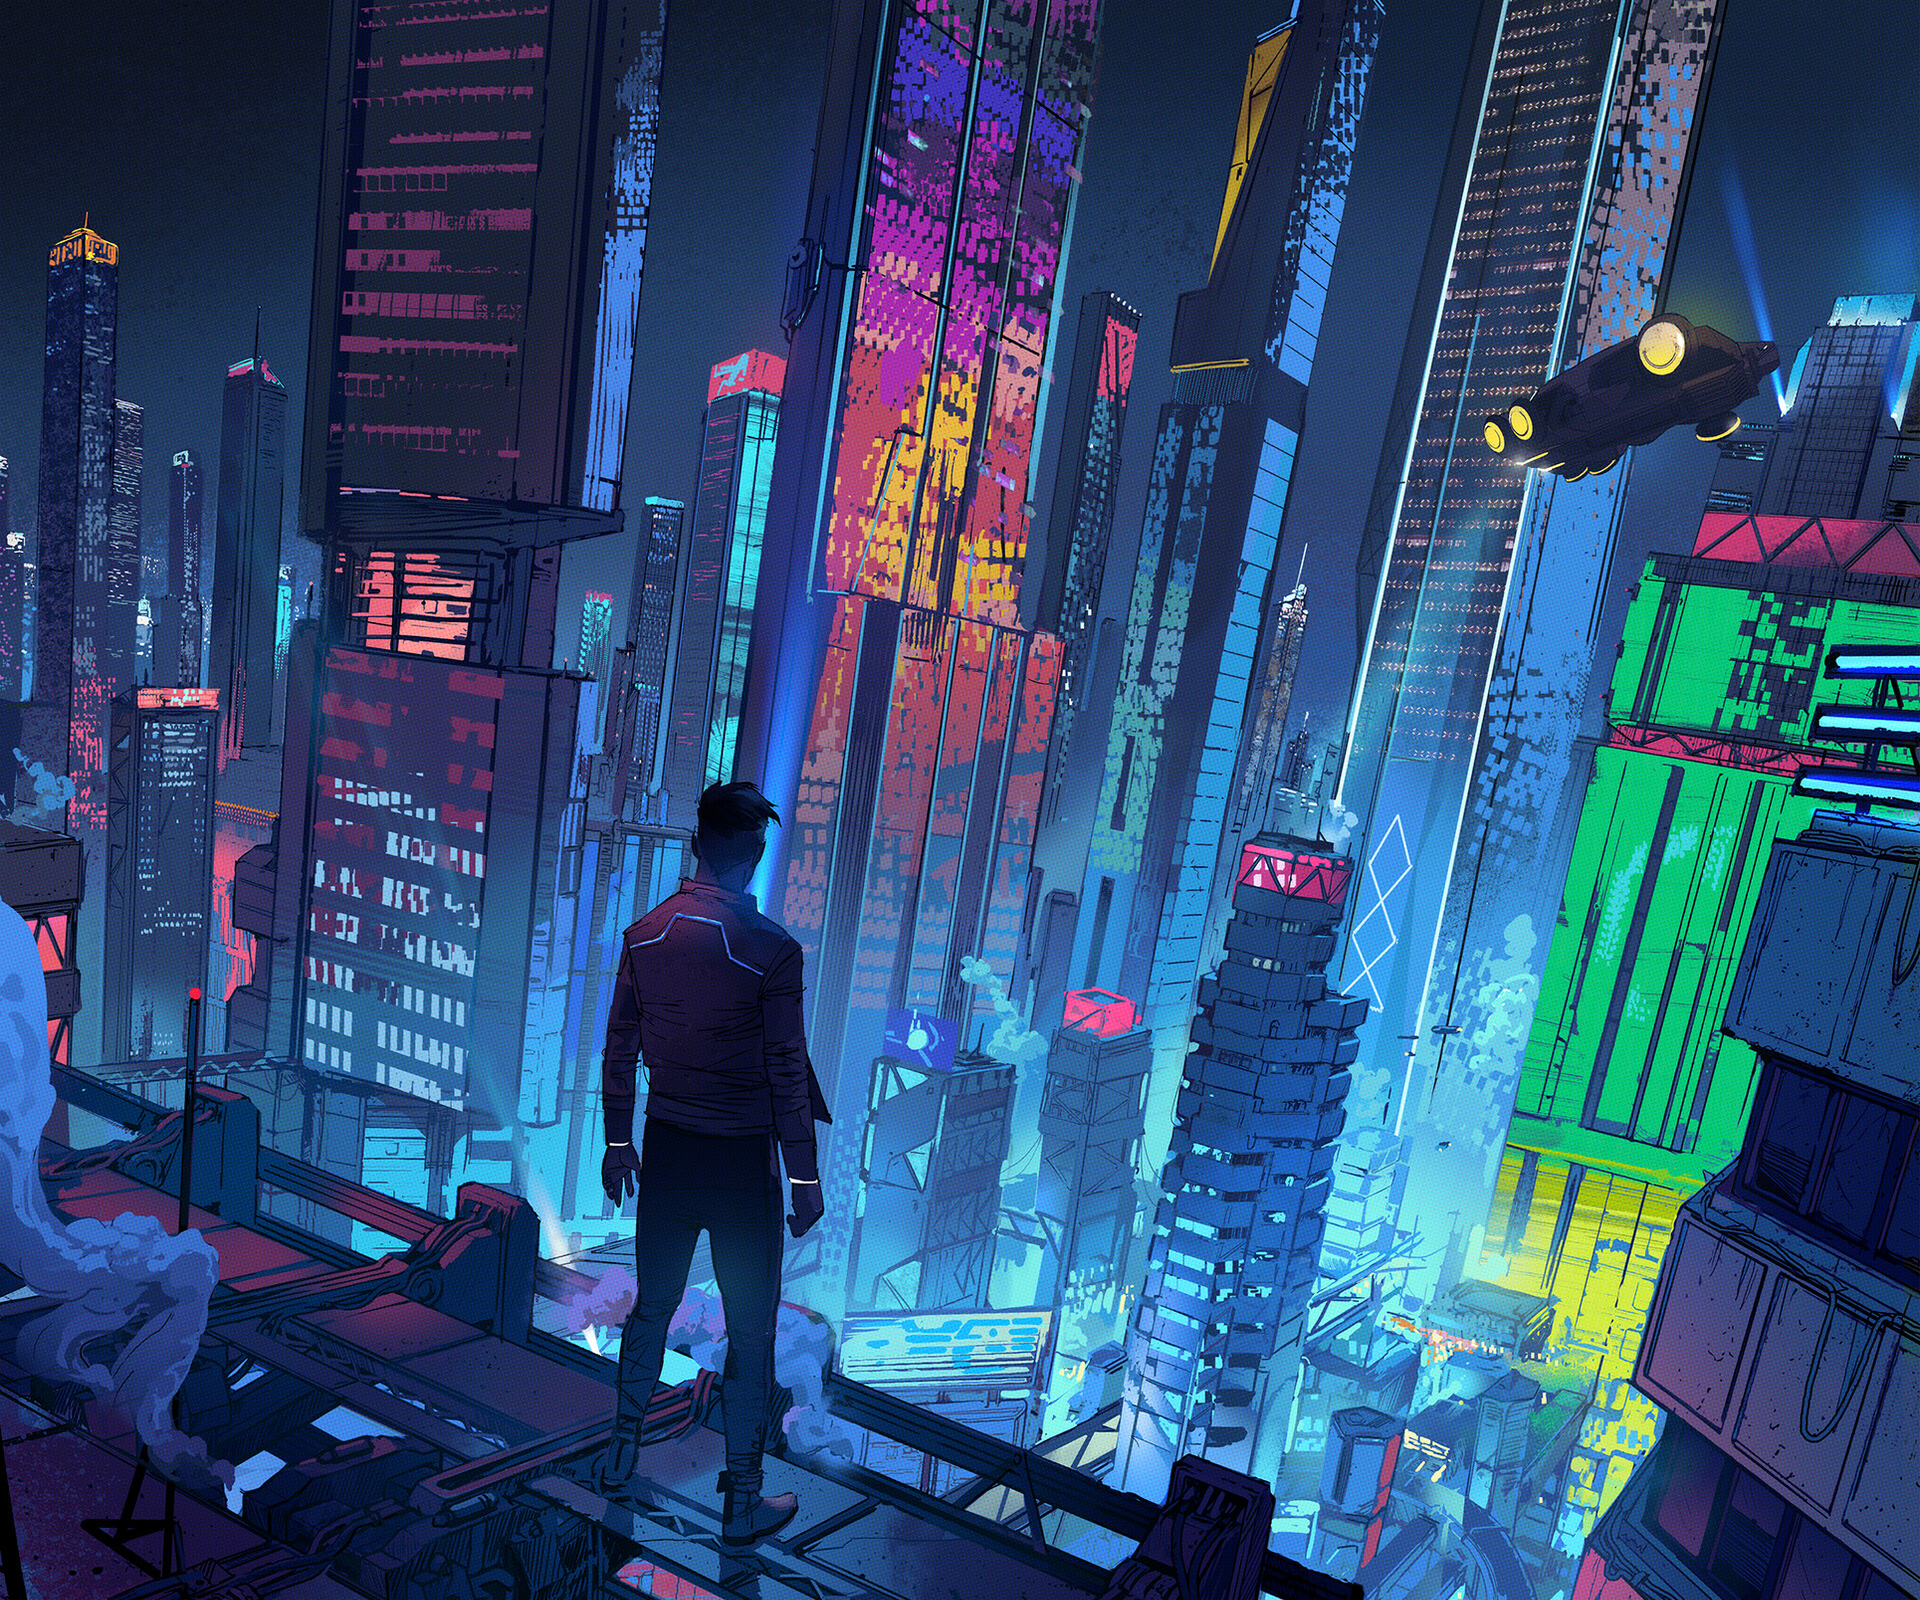 1280x2120 Cyberpunk Neon City iPhone 6+ ,HD 4k Wallpapers,Images,Backgrounds,Photos  and Pictures